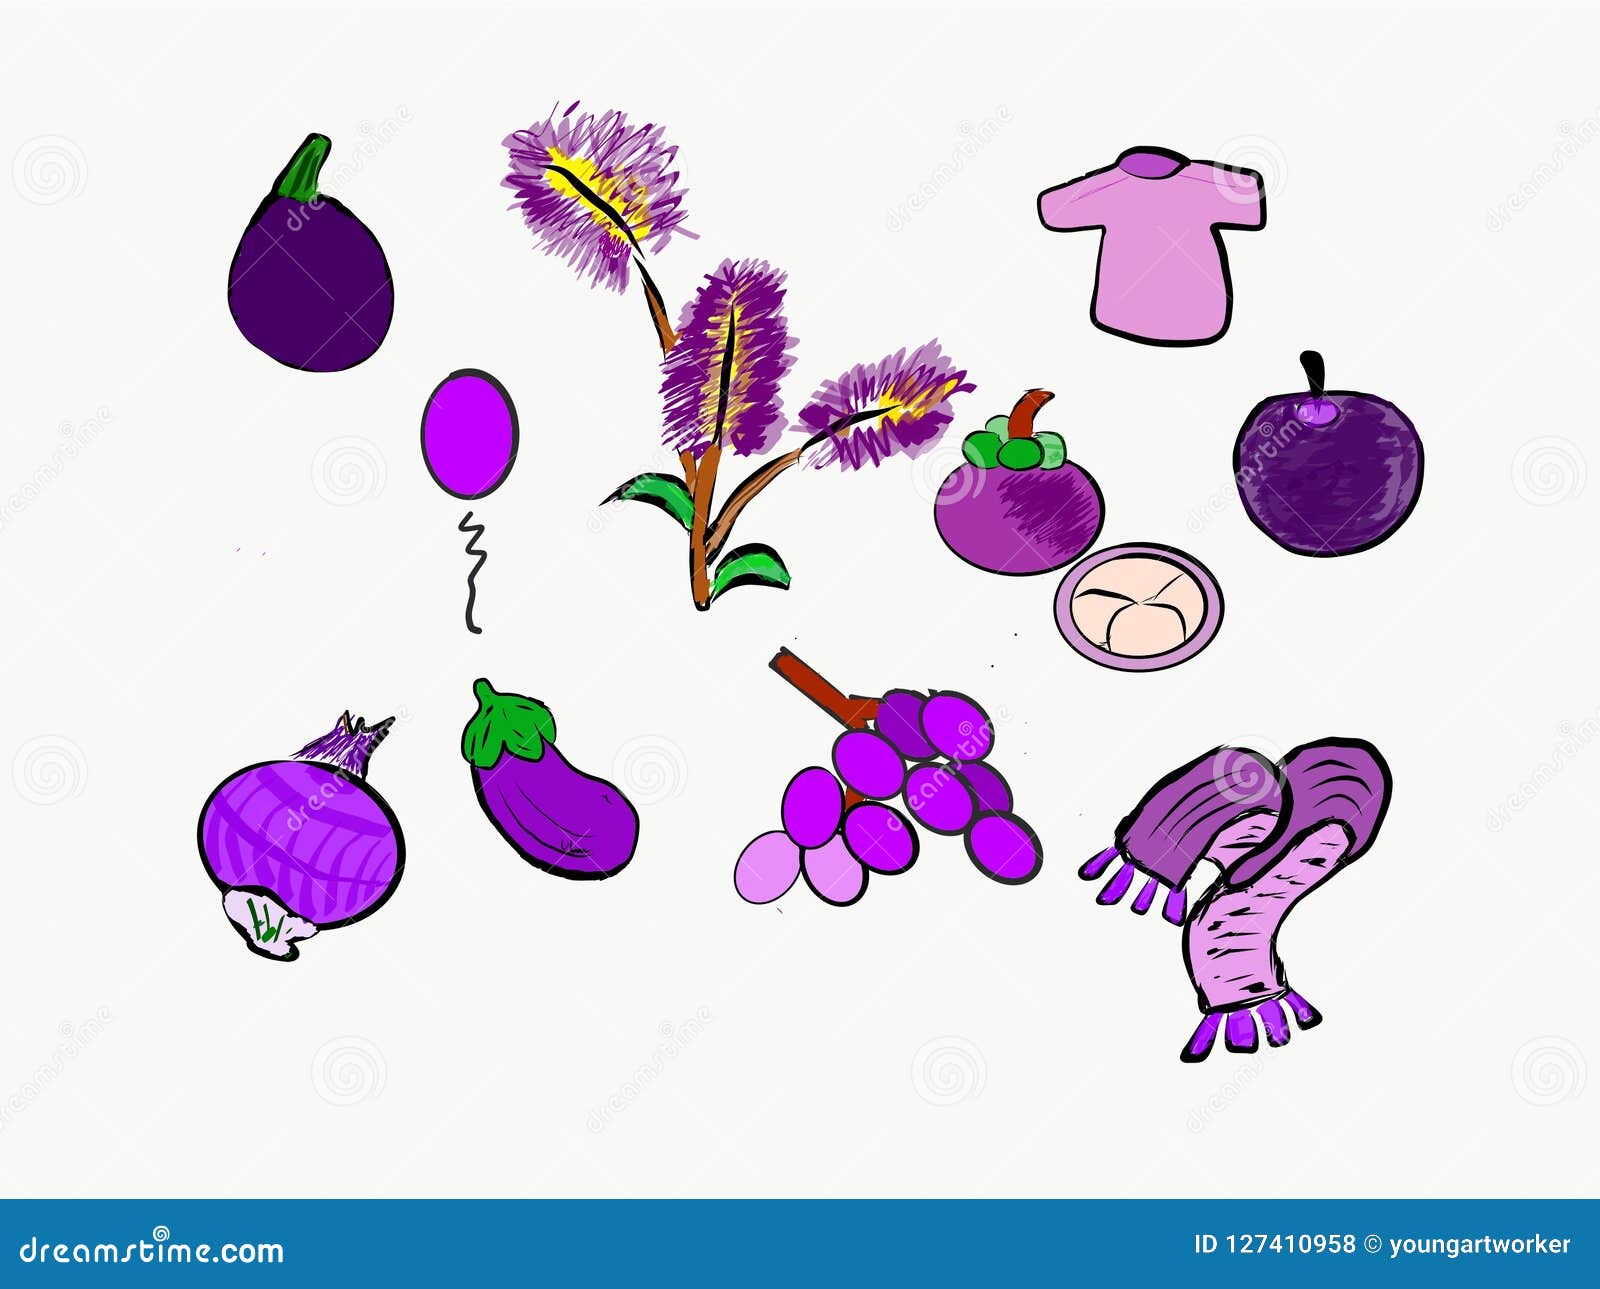 What Kind of Things are the Color Prune Plum Eggplant Onion Grapes Scarf Balloon Nature Life Art Stock Illustration - Illustration of nature, purple: 127410958